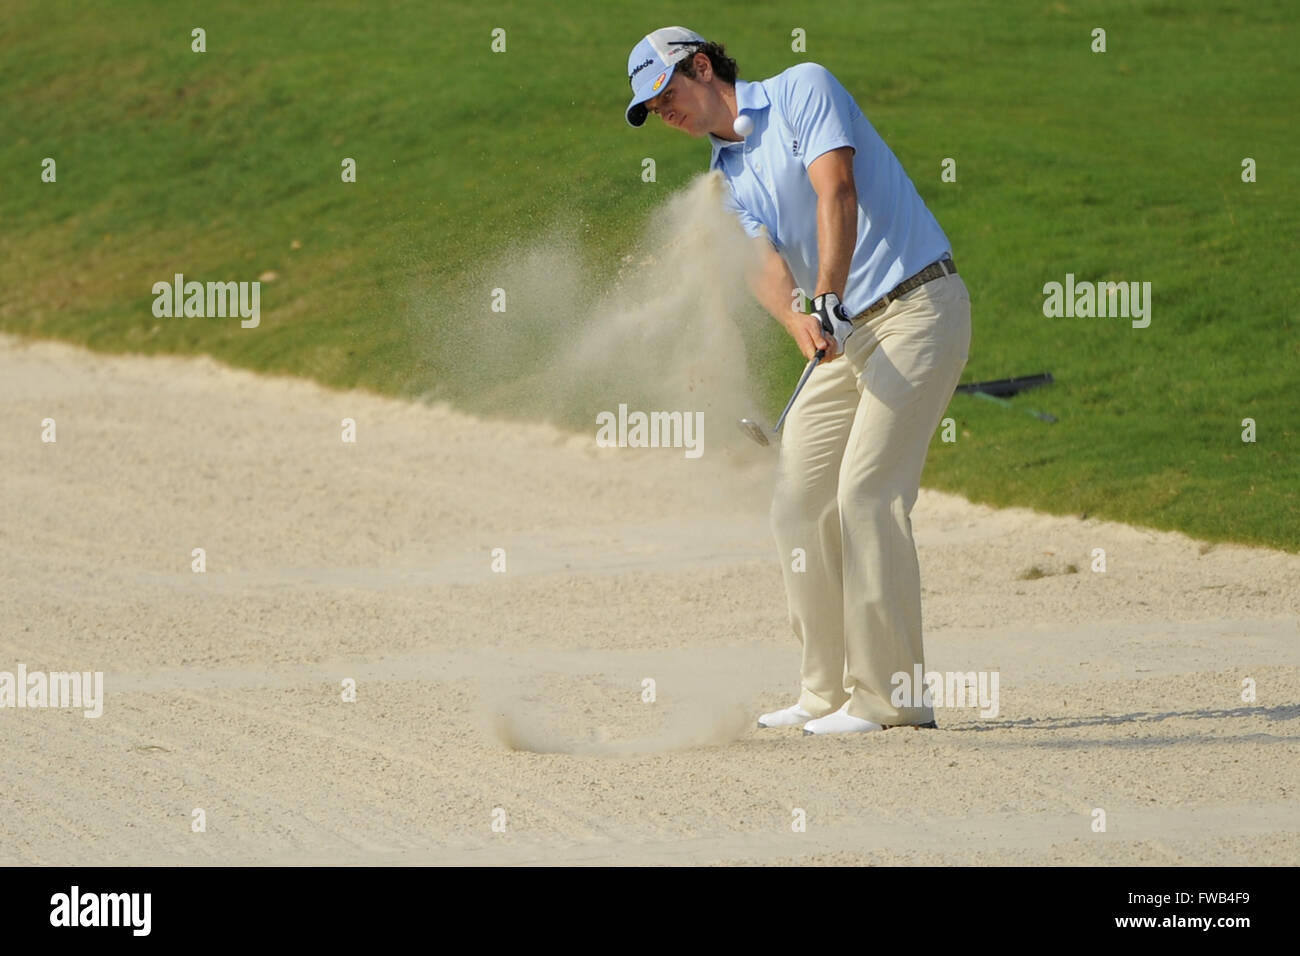 Ponte Vedra Beach, Florida, USA. 8th May, 2008. Justin Rose hits out a greenside bunker on the 11th hole during the first round of the Players Championship at TPC Sawgrass on May 8, 2008 in Ponte Vedra Beach, Florida. ZUMA Press/Scott A. Miller © Scott A. Miller/ZUMA Wire/Alamy Live News Stock Photo